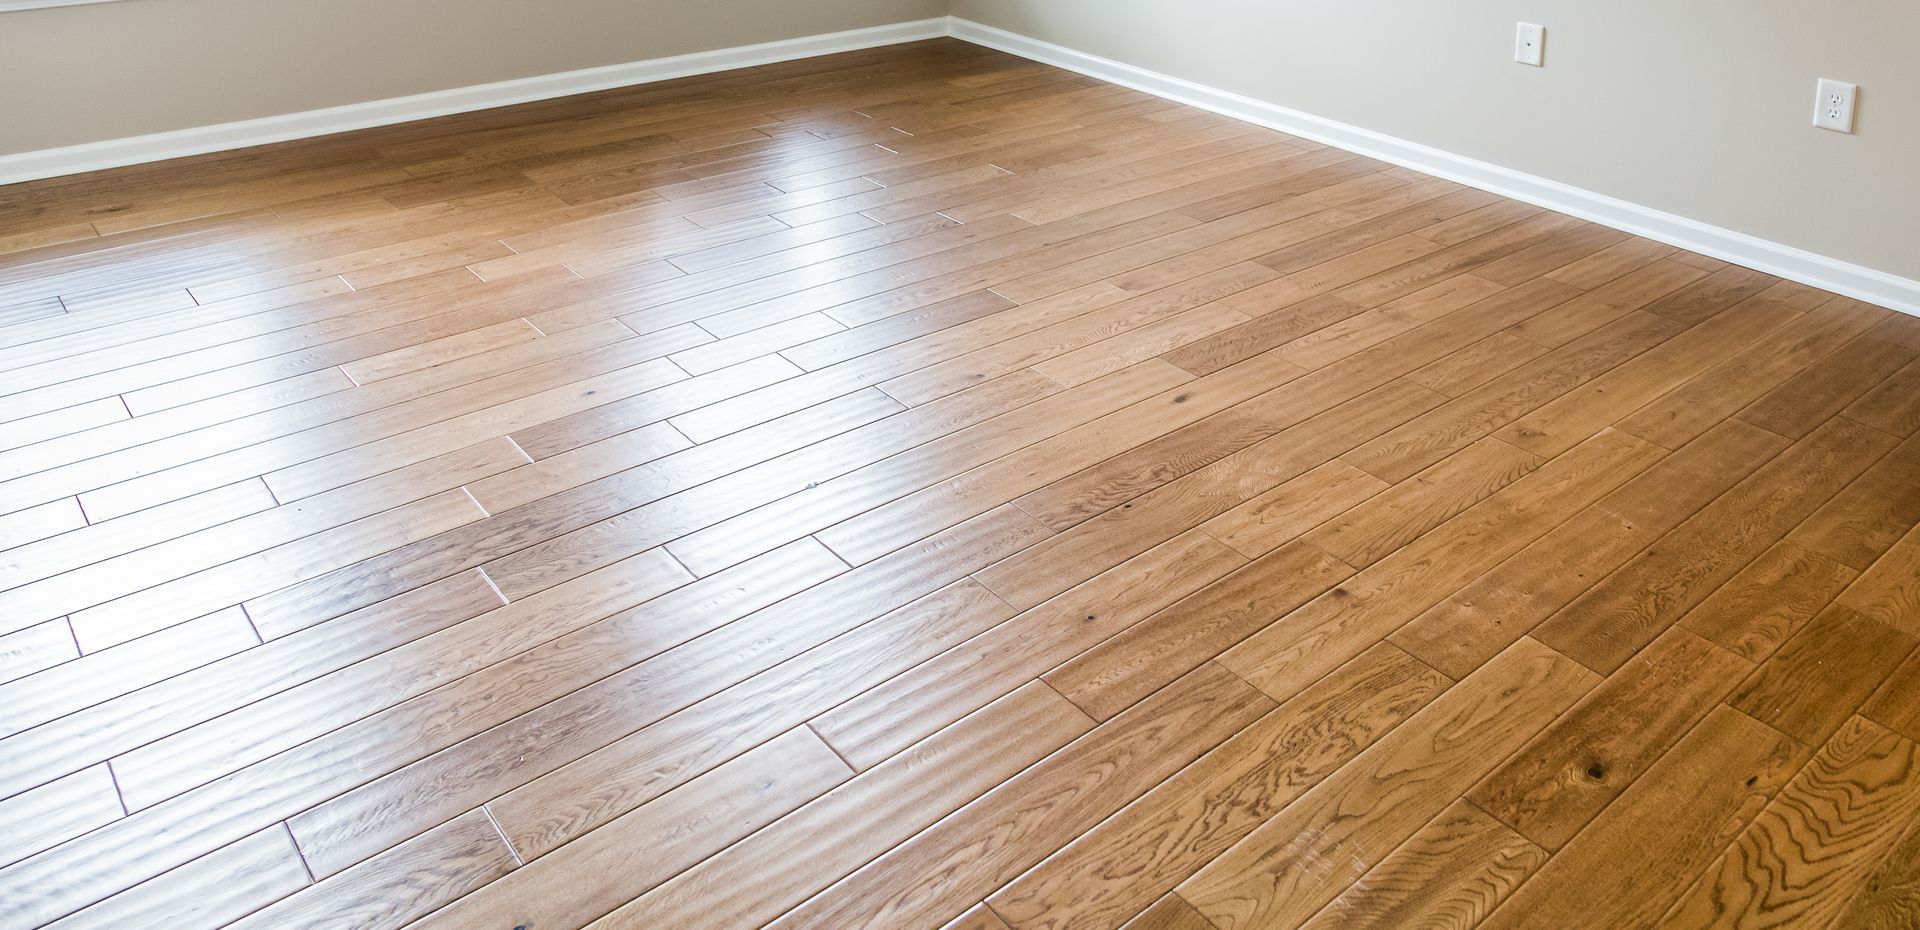 A gleaming, freshly-installed hardwood floor reflecting ambient light, showcasing its impeccable shine and smooth surface.